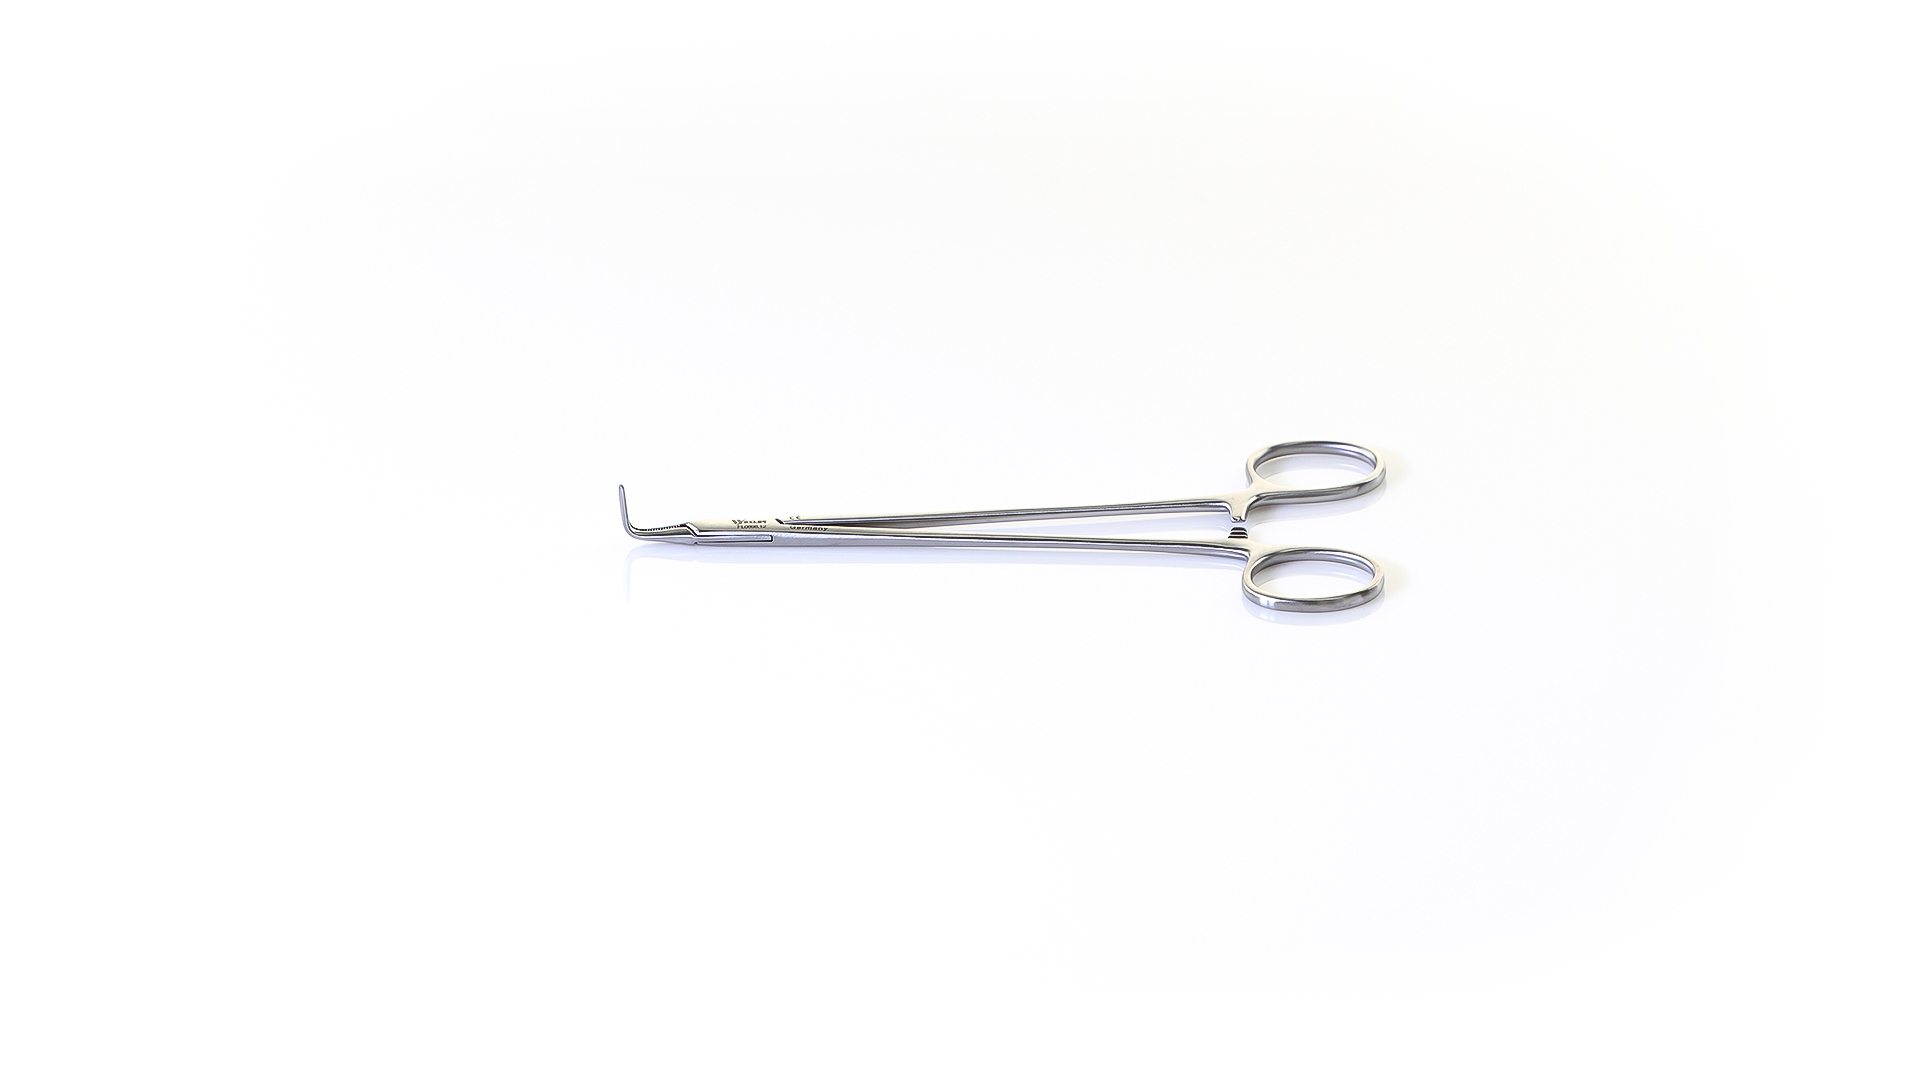 Bailey Forceps - 90° Angled Very Fine serrated jaws